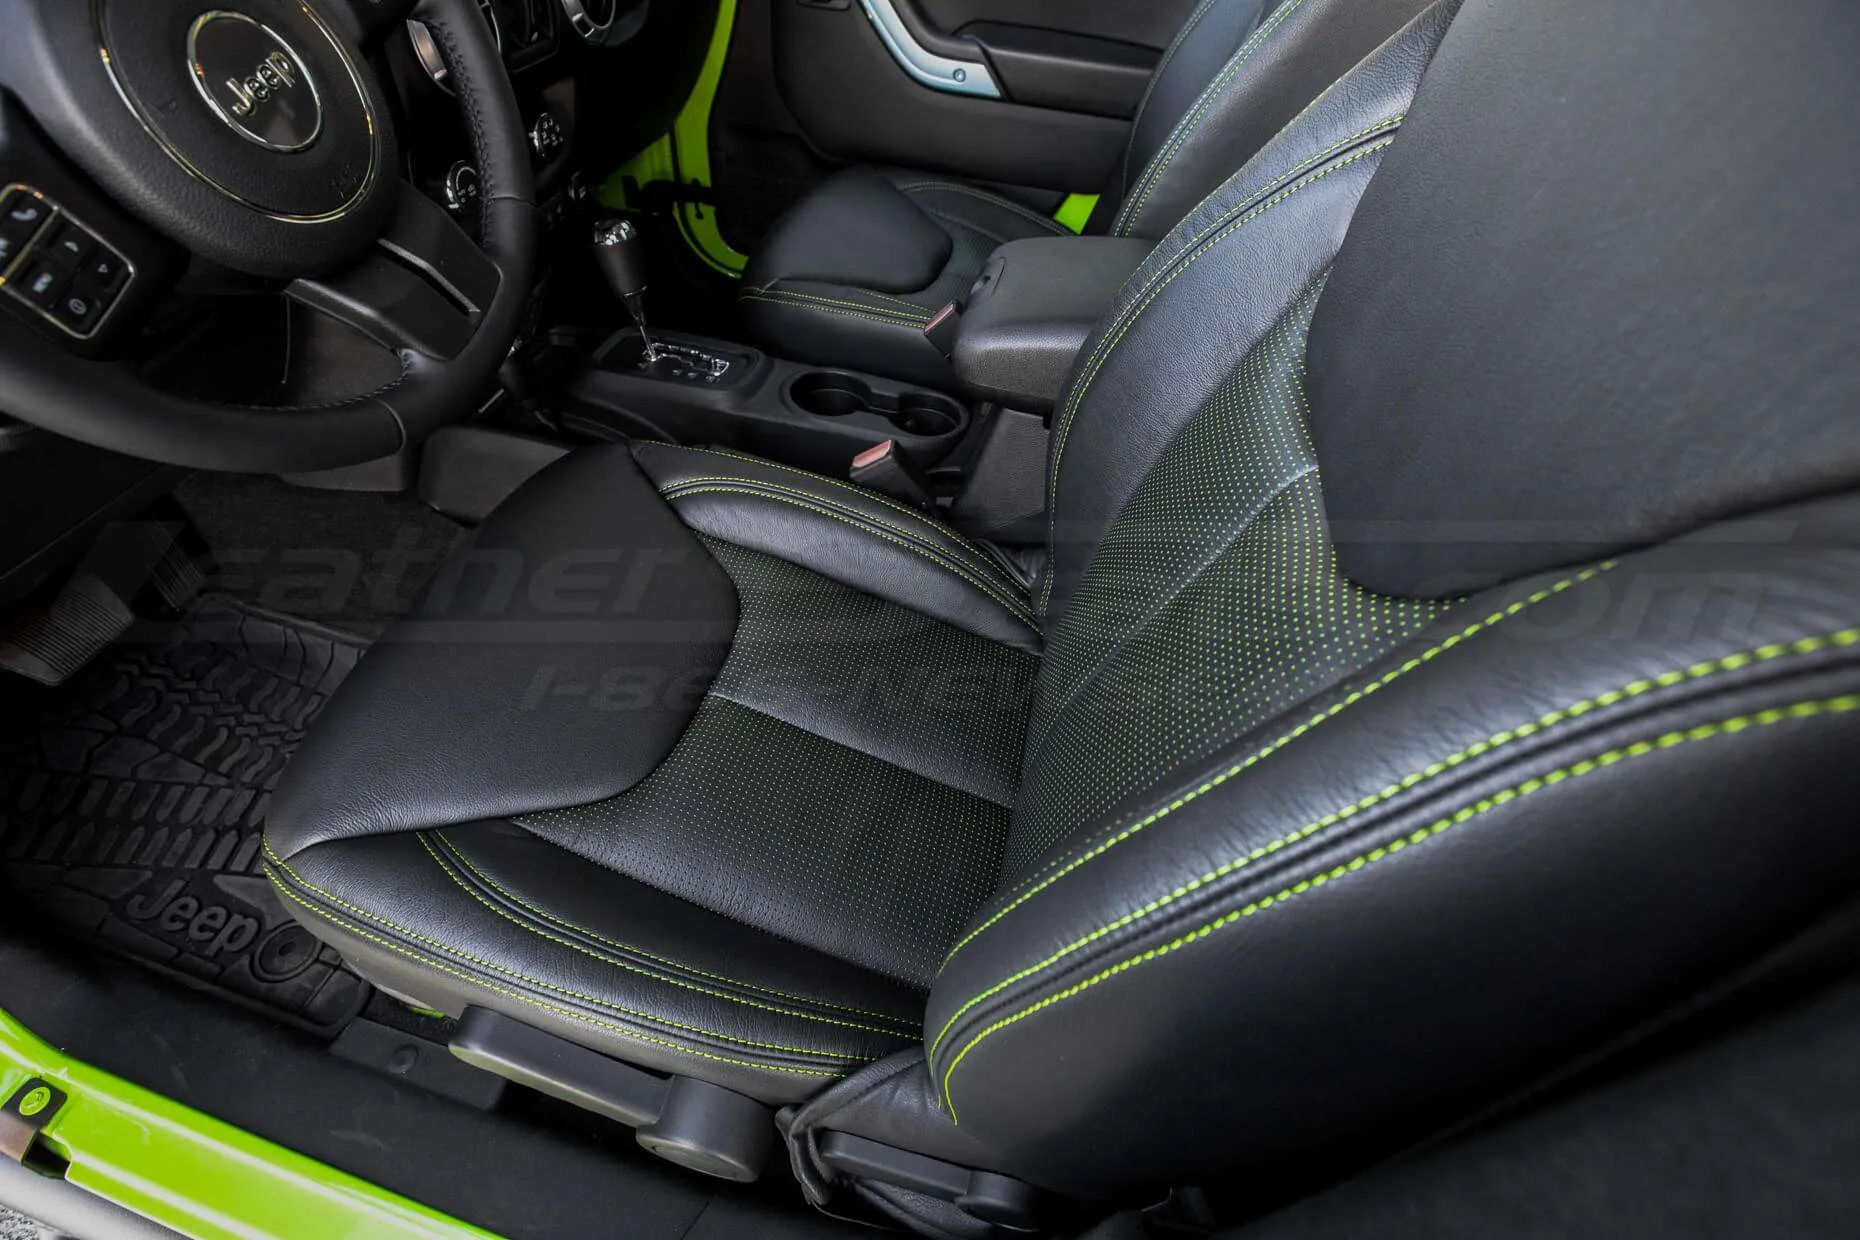 Jeep Wrangler Installed Leather Seats - Black & Piazza Green -Front drivers seat top-down view